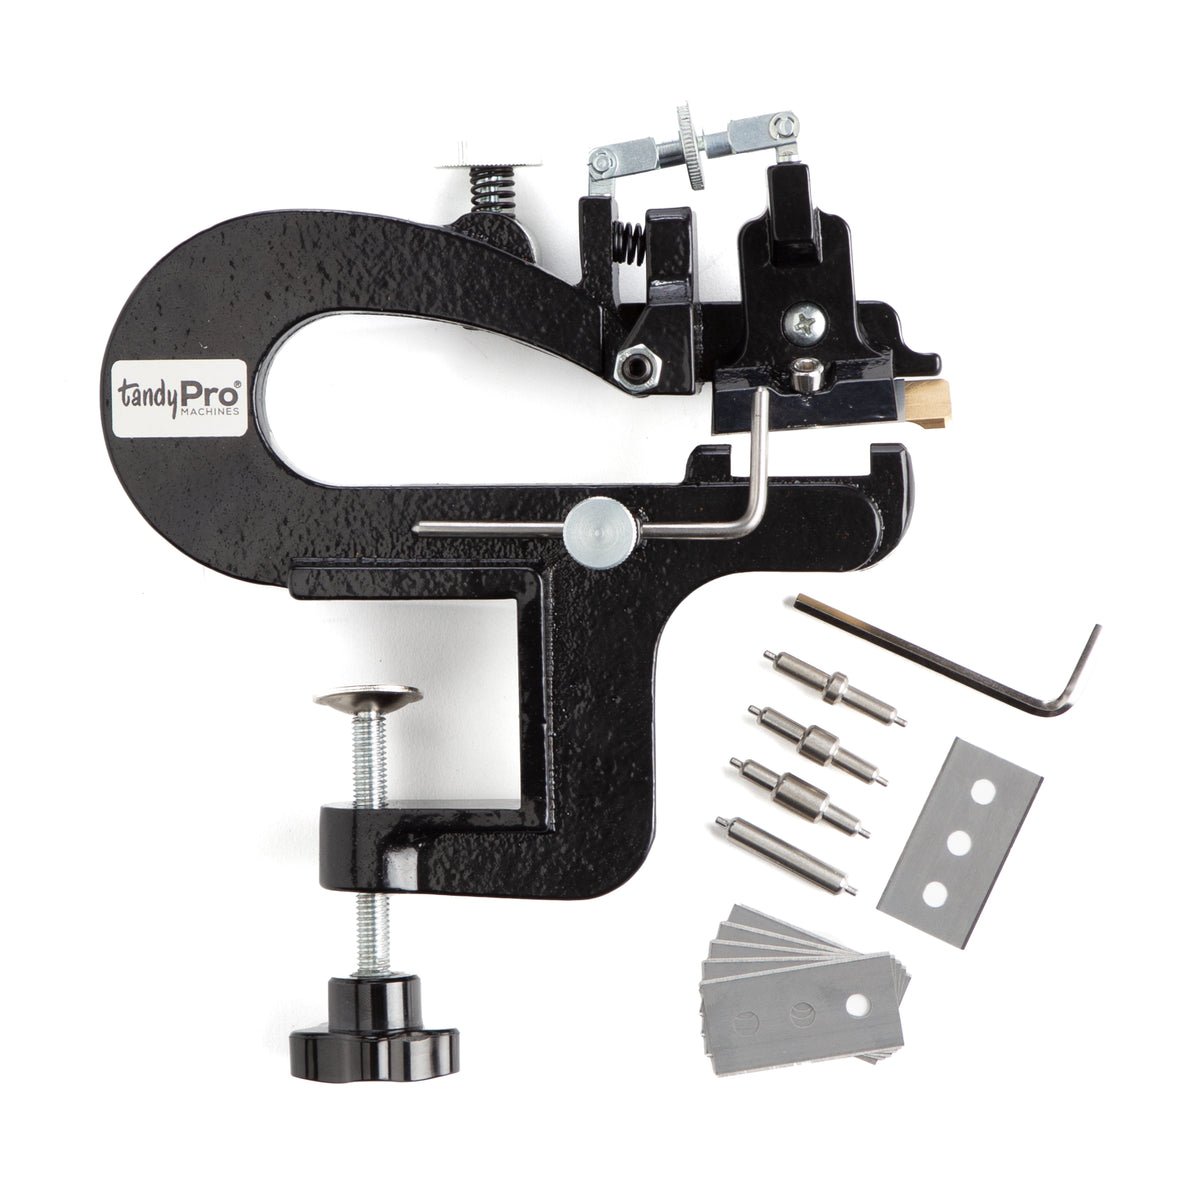 Tandy Leather Craft tool hand press with accesories for Sale in West